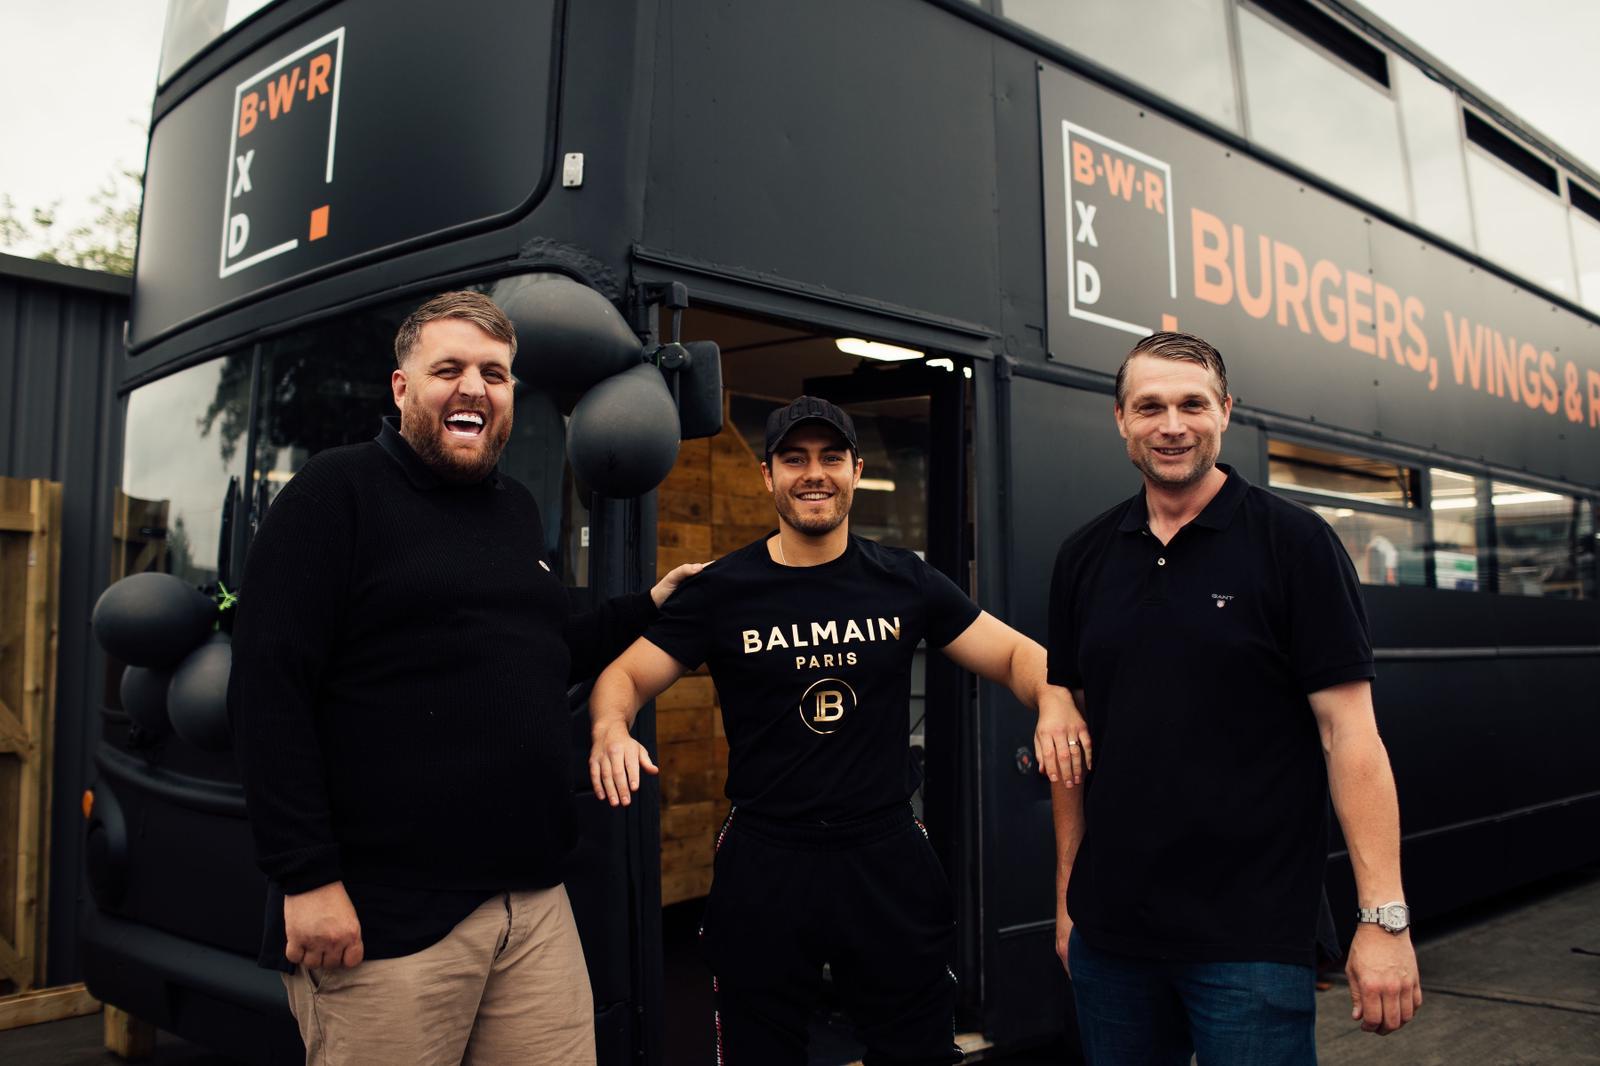 Colchester's Burgers, Wings & Ribs celebrates making £1million